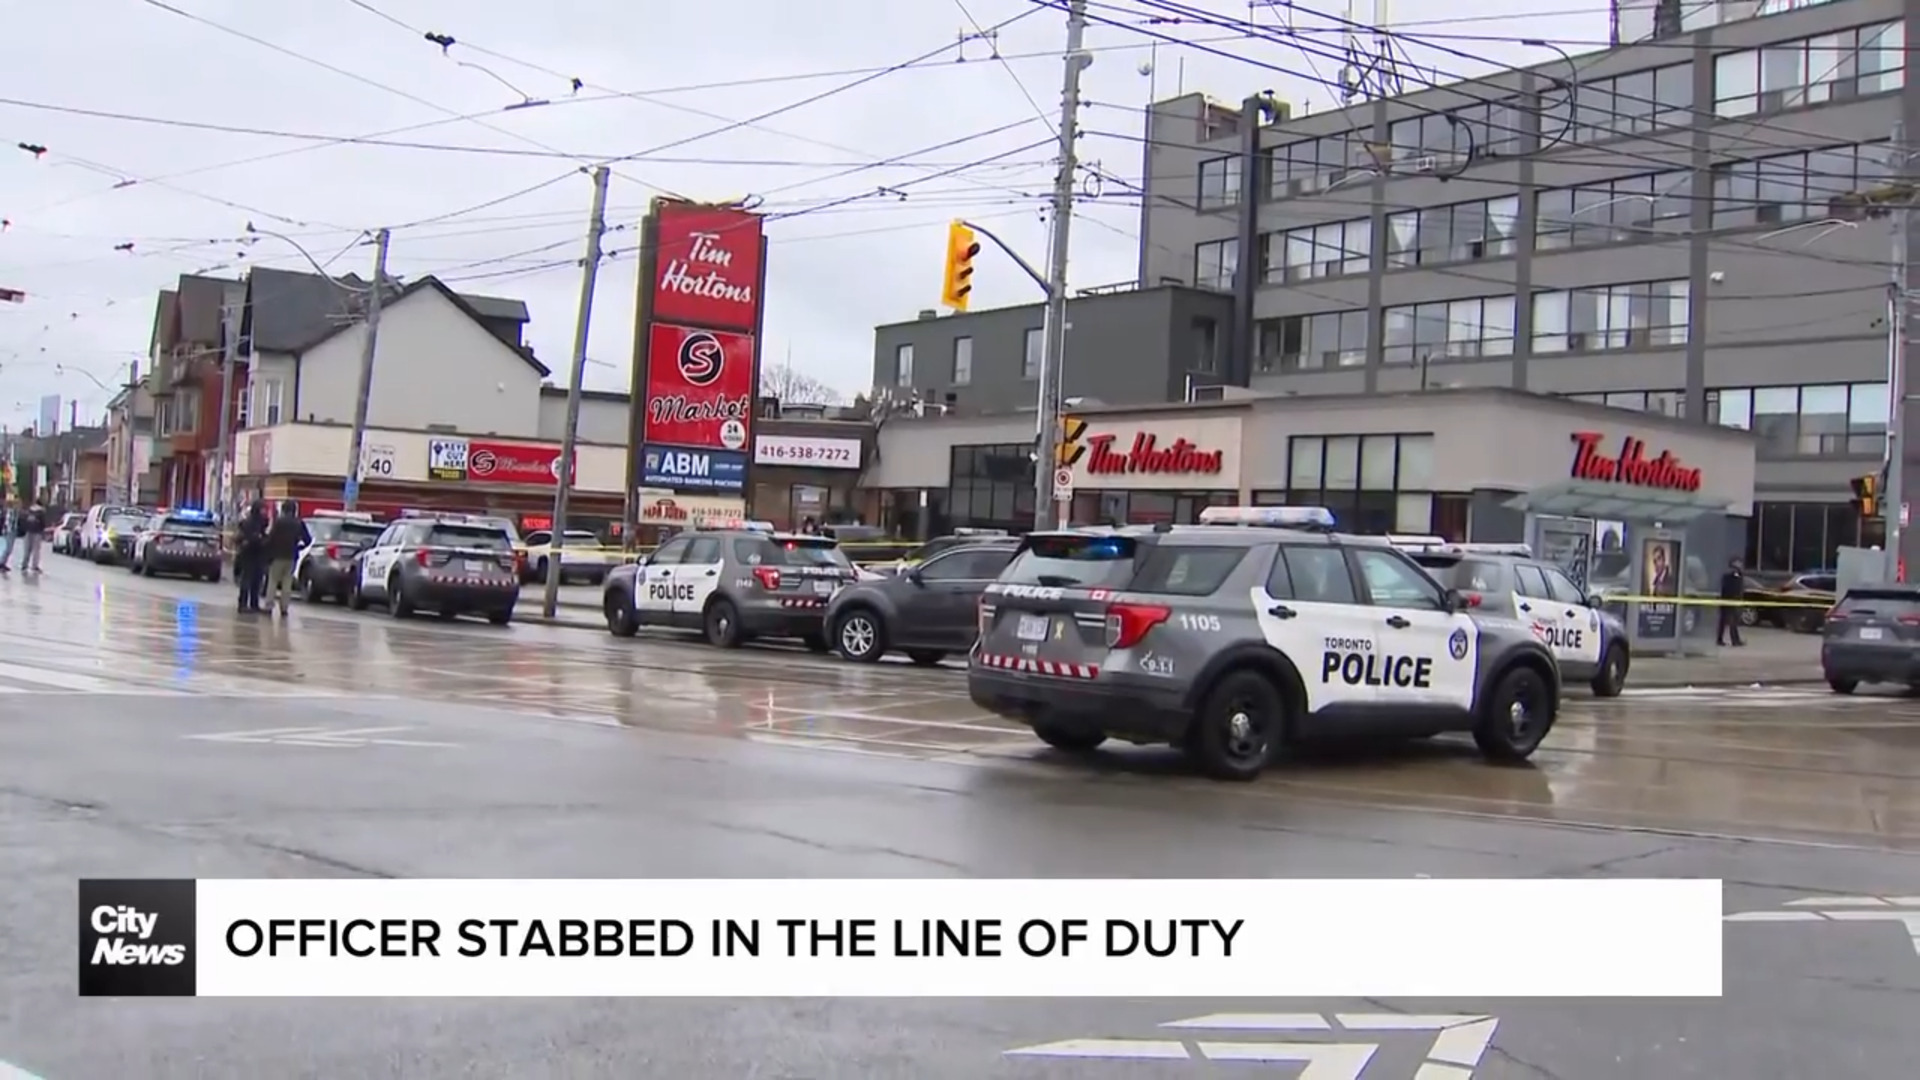 Officer stabbed in the line of duty